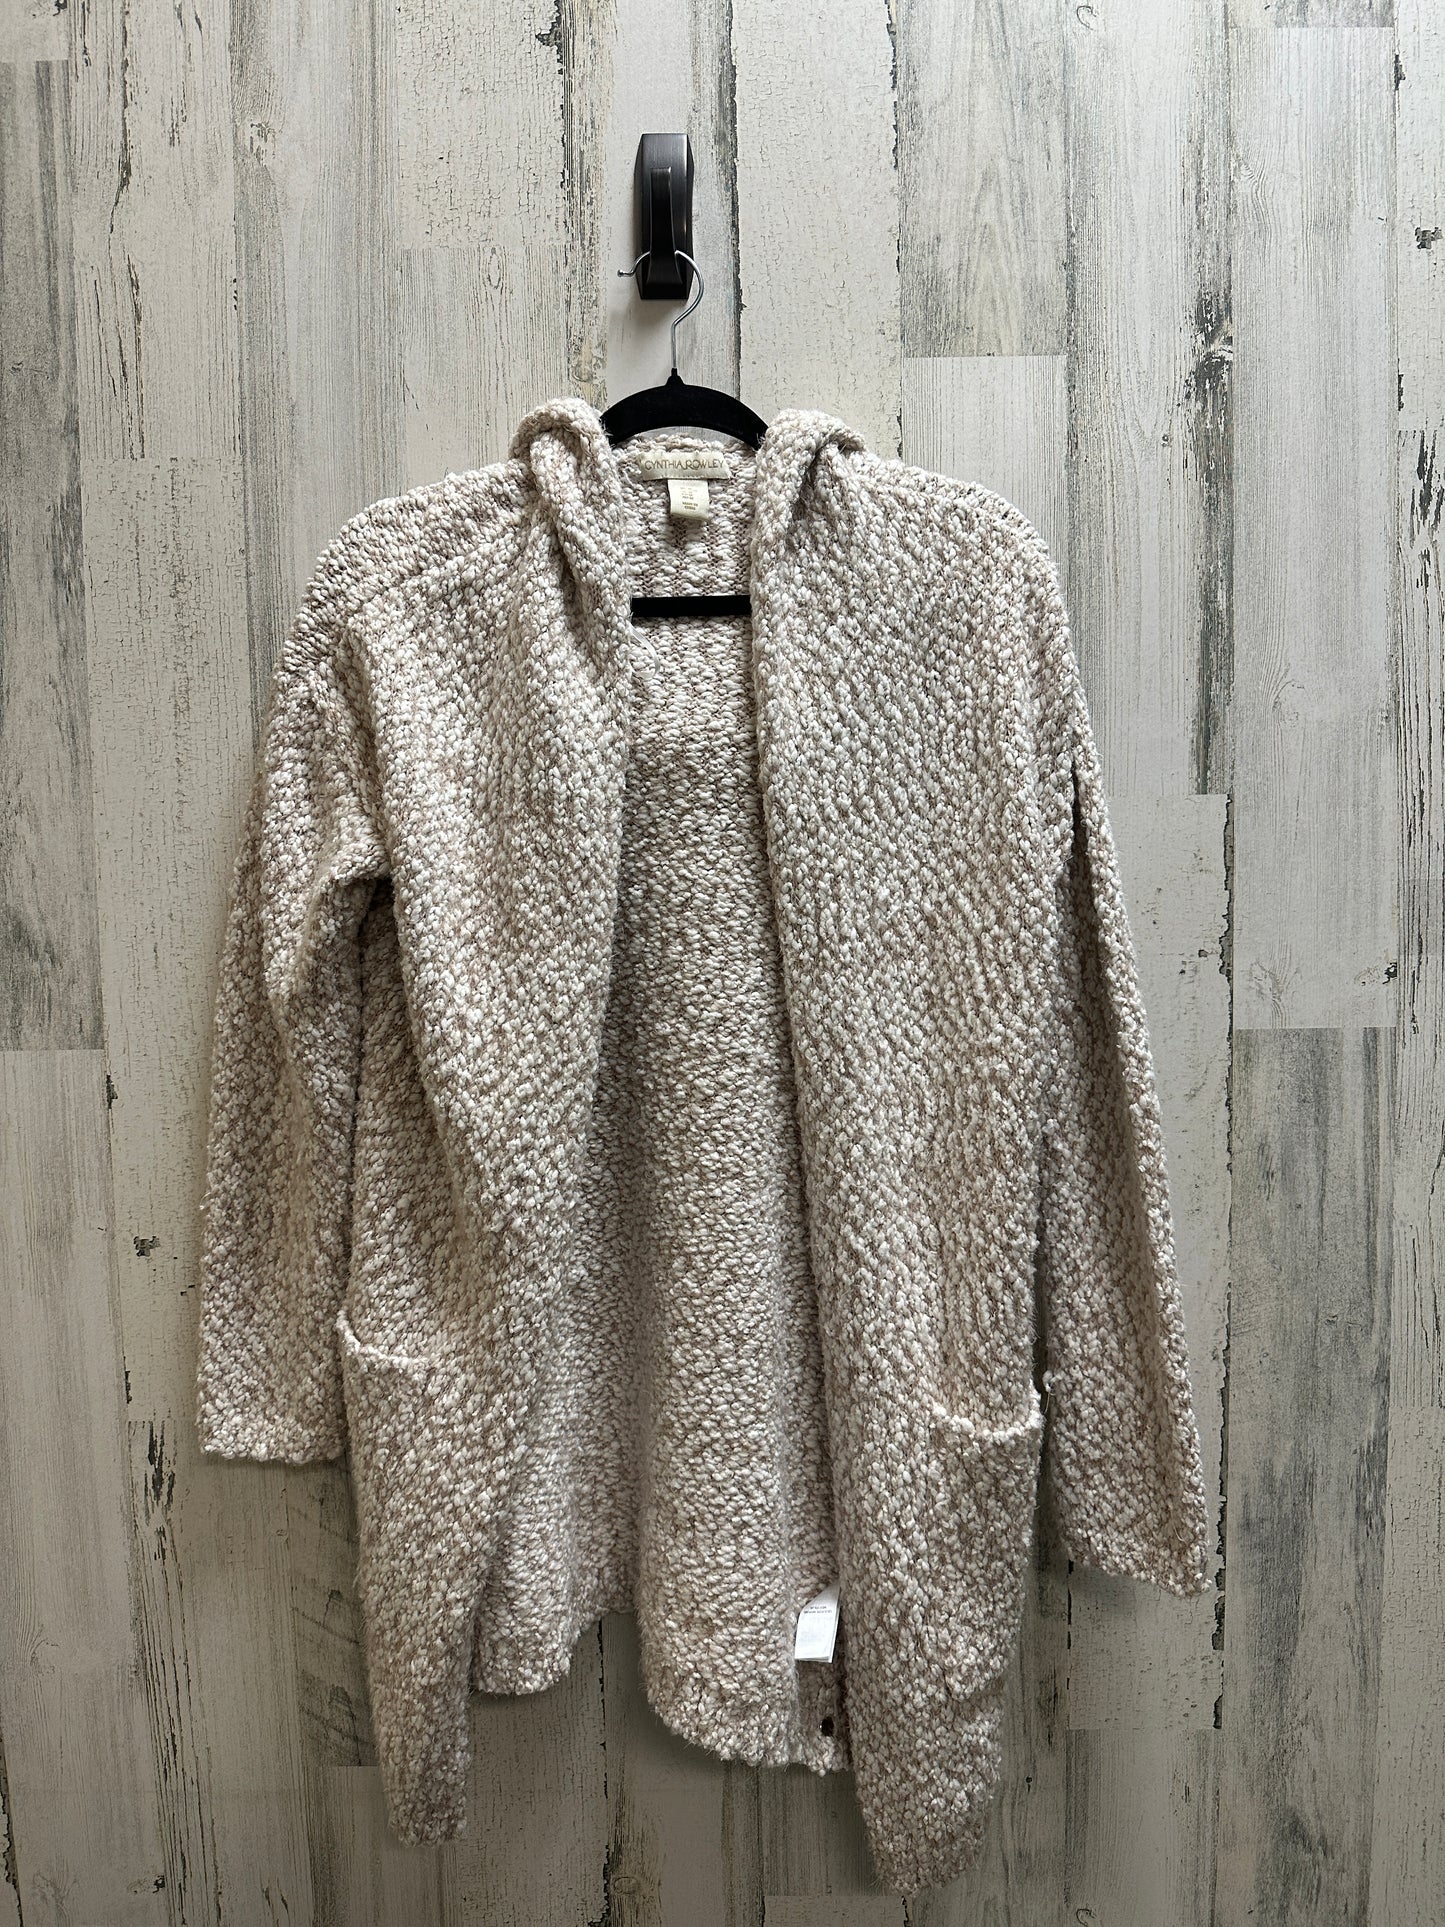 Sweater By Cynthia Rowley  Size: M